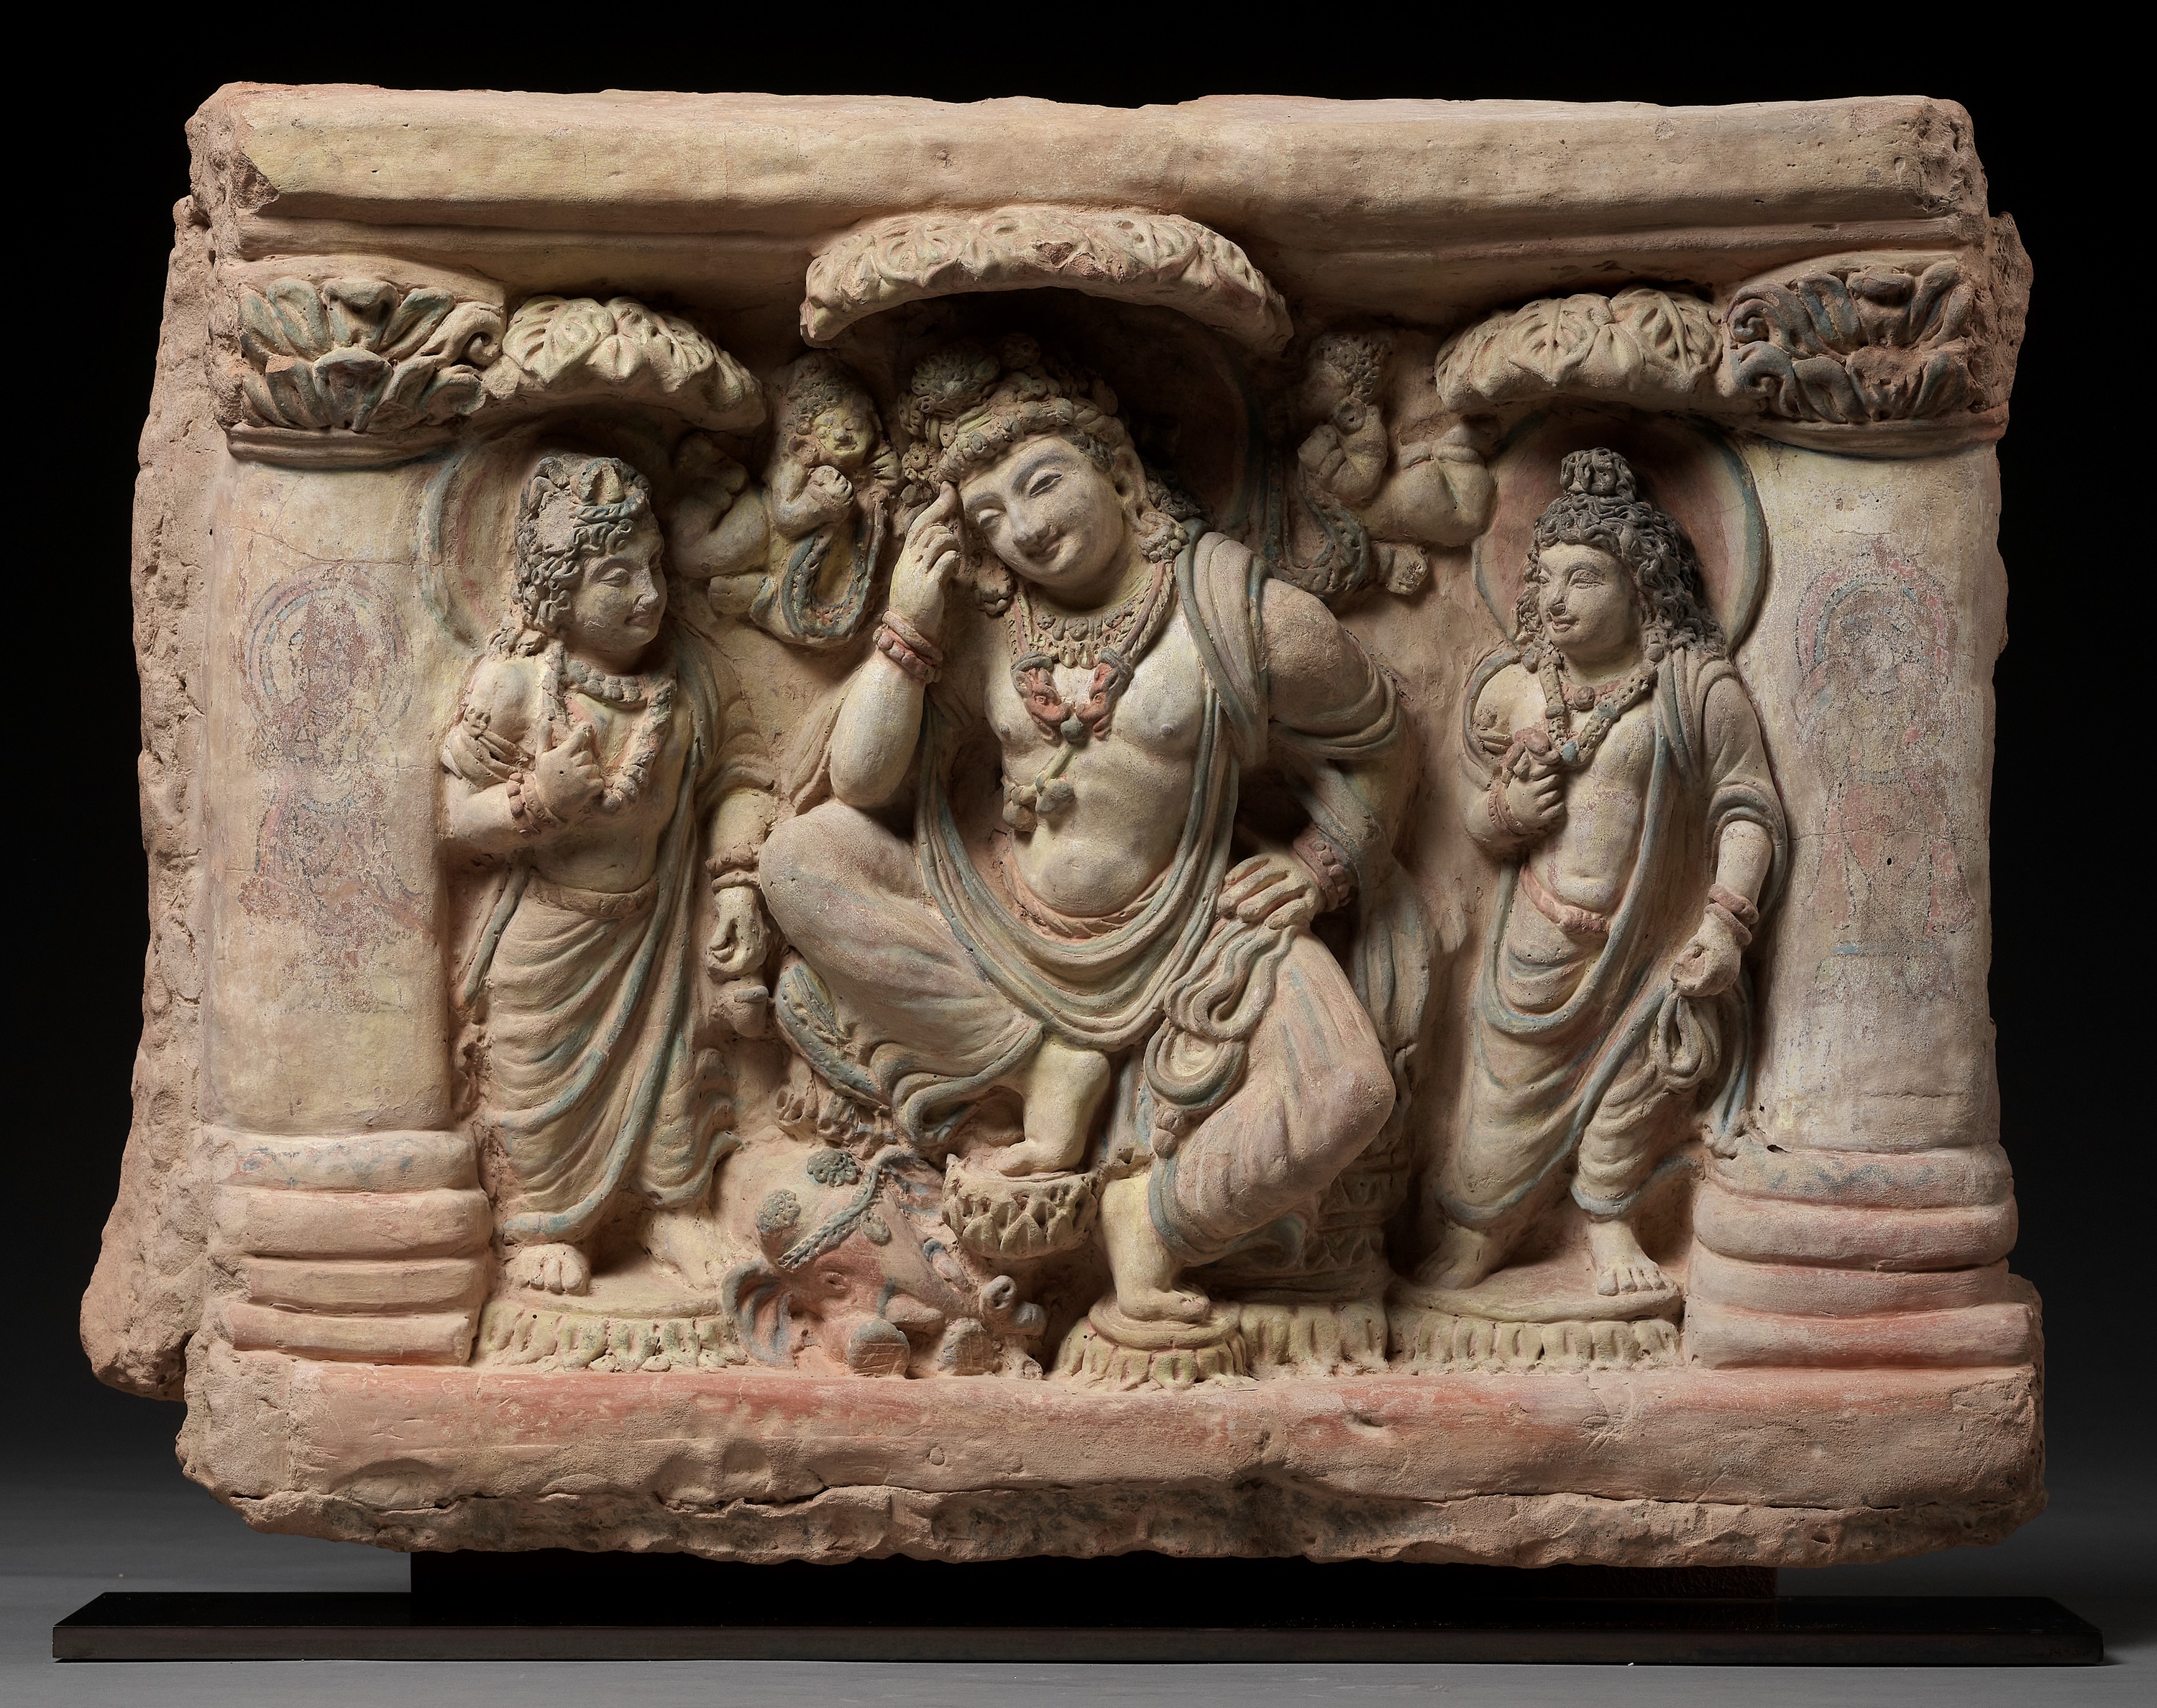 A TERRACOTTA RELIEF OF A THINKING PRINCE SIDDHARTA UNDER THE BODHI TREE, ANCIENT REGION OF GANDHARA